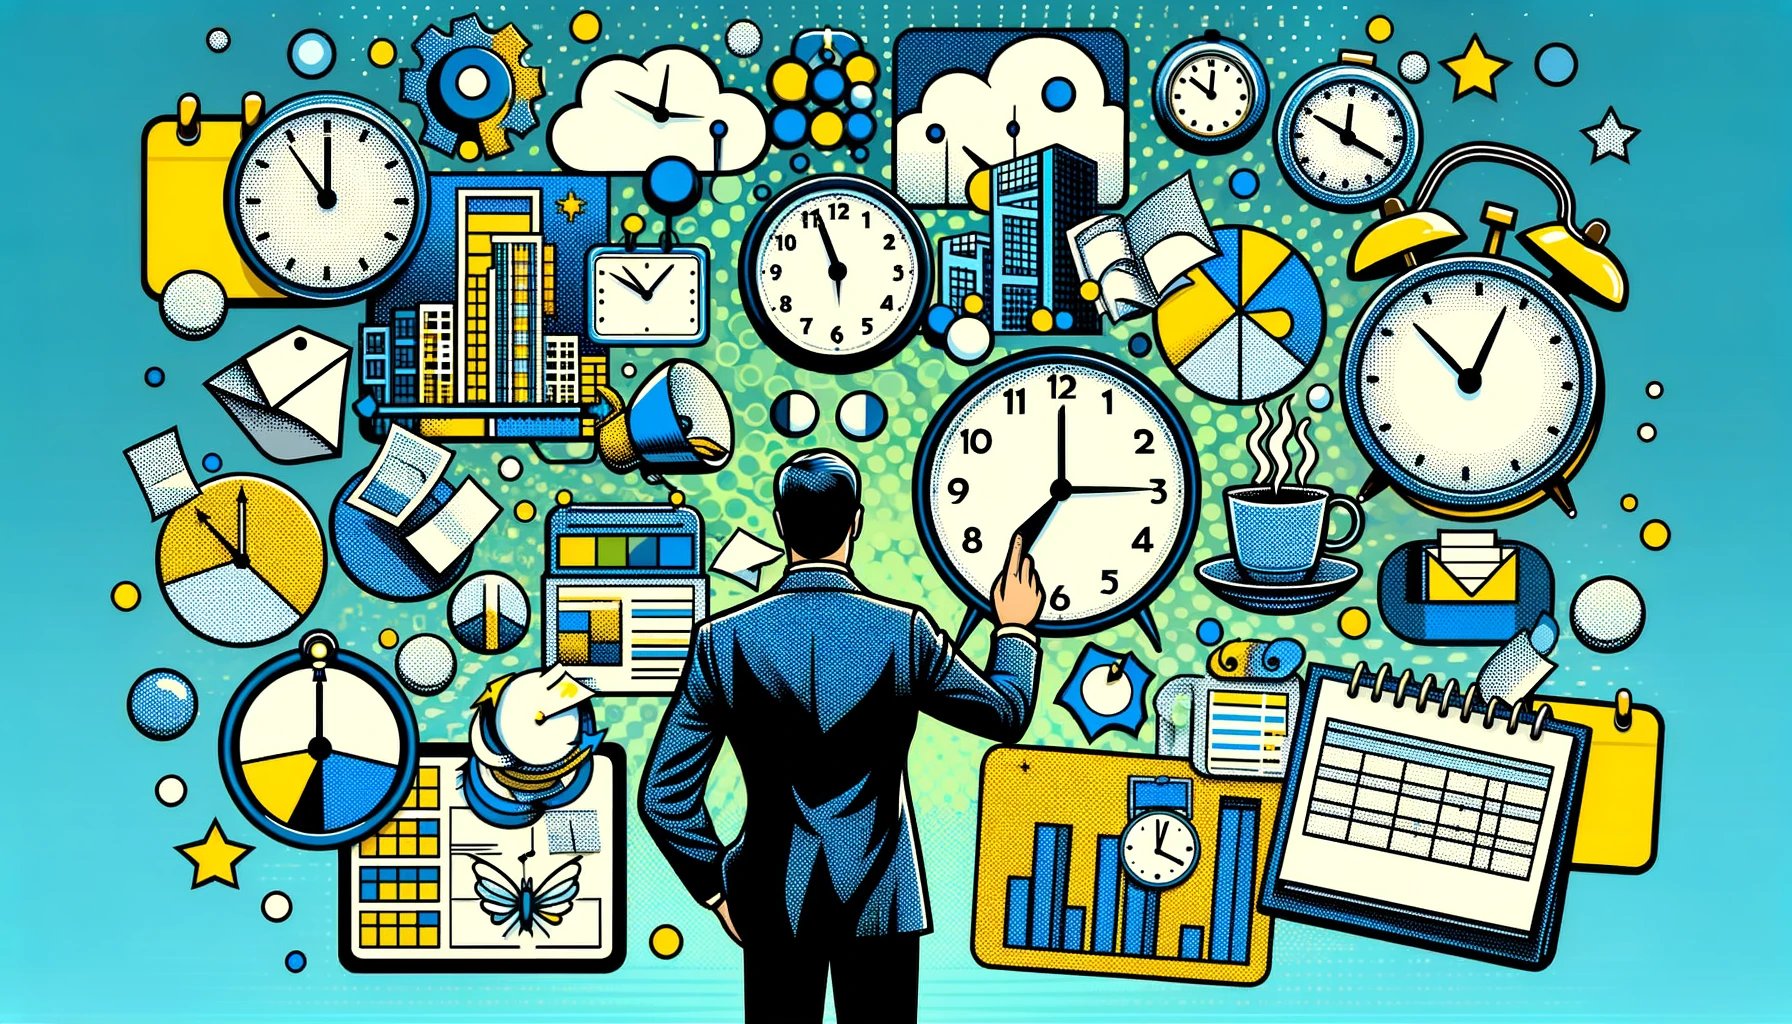 DALL·E 2024-03-19 11.44.09 - Design a pop art style image that captures the theme of time management for business owners, infused with the visual style and color palette of blues,